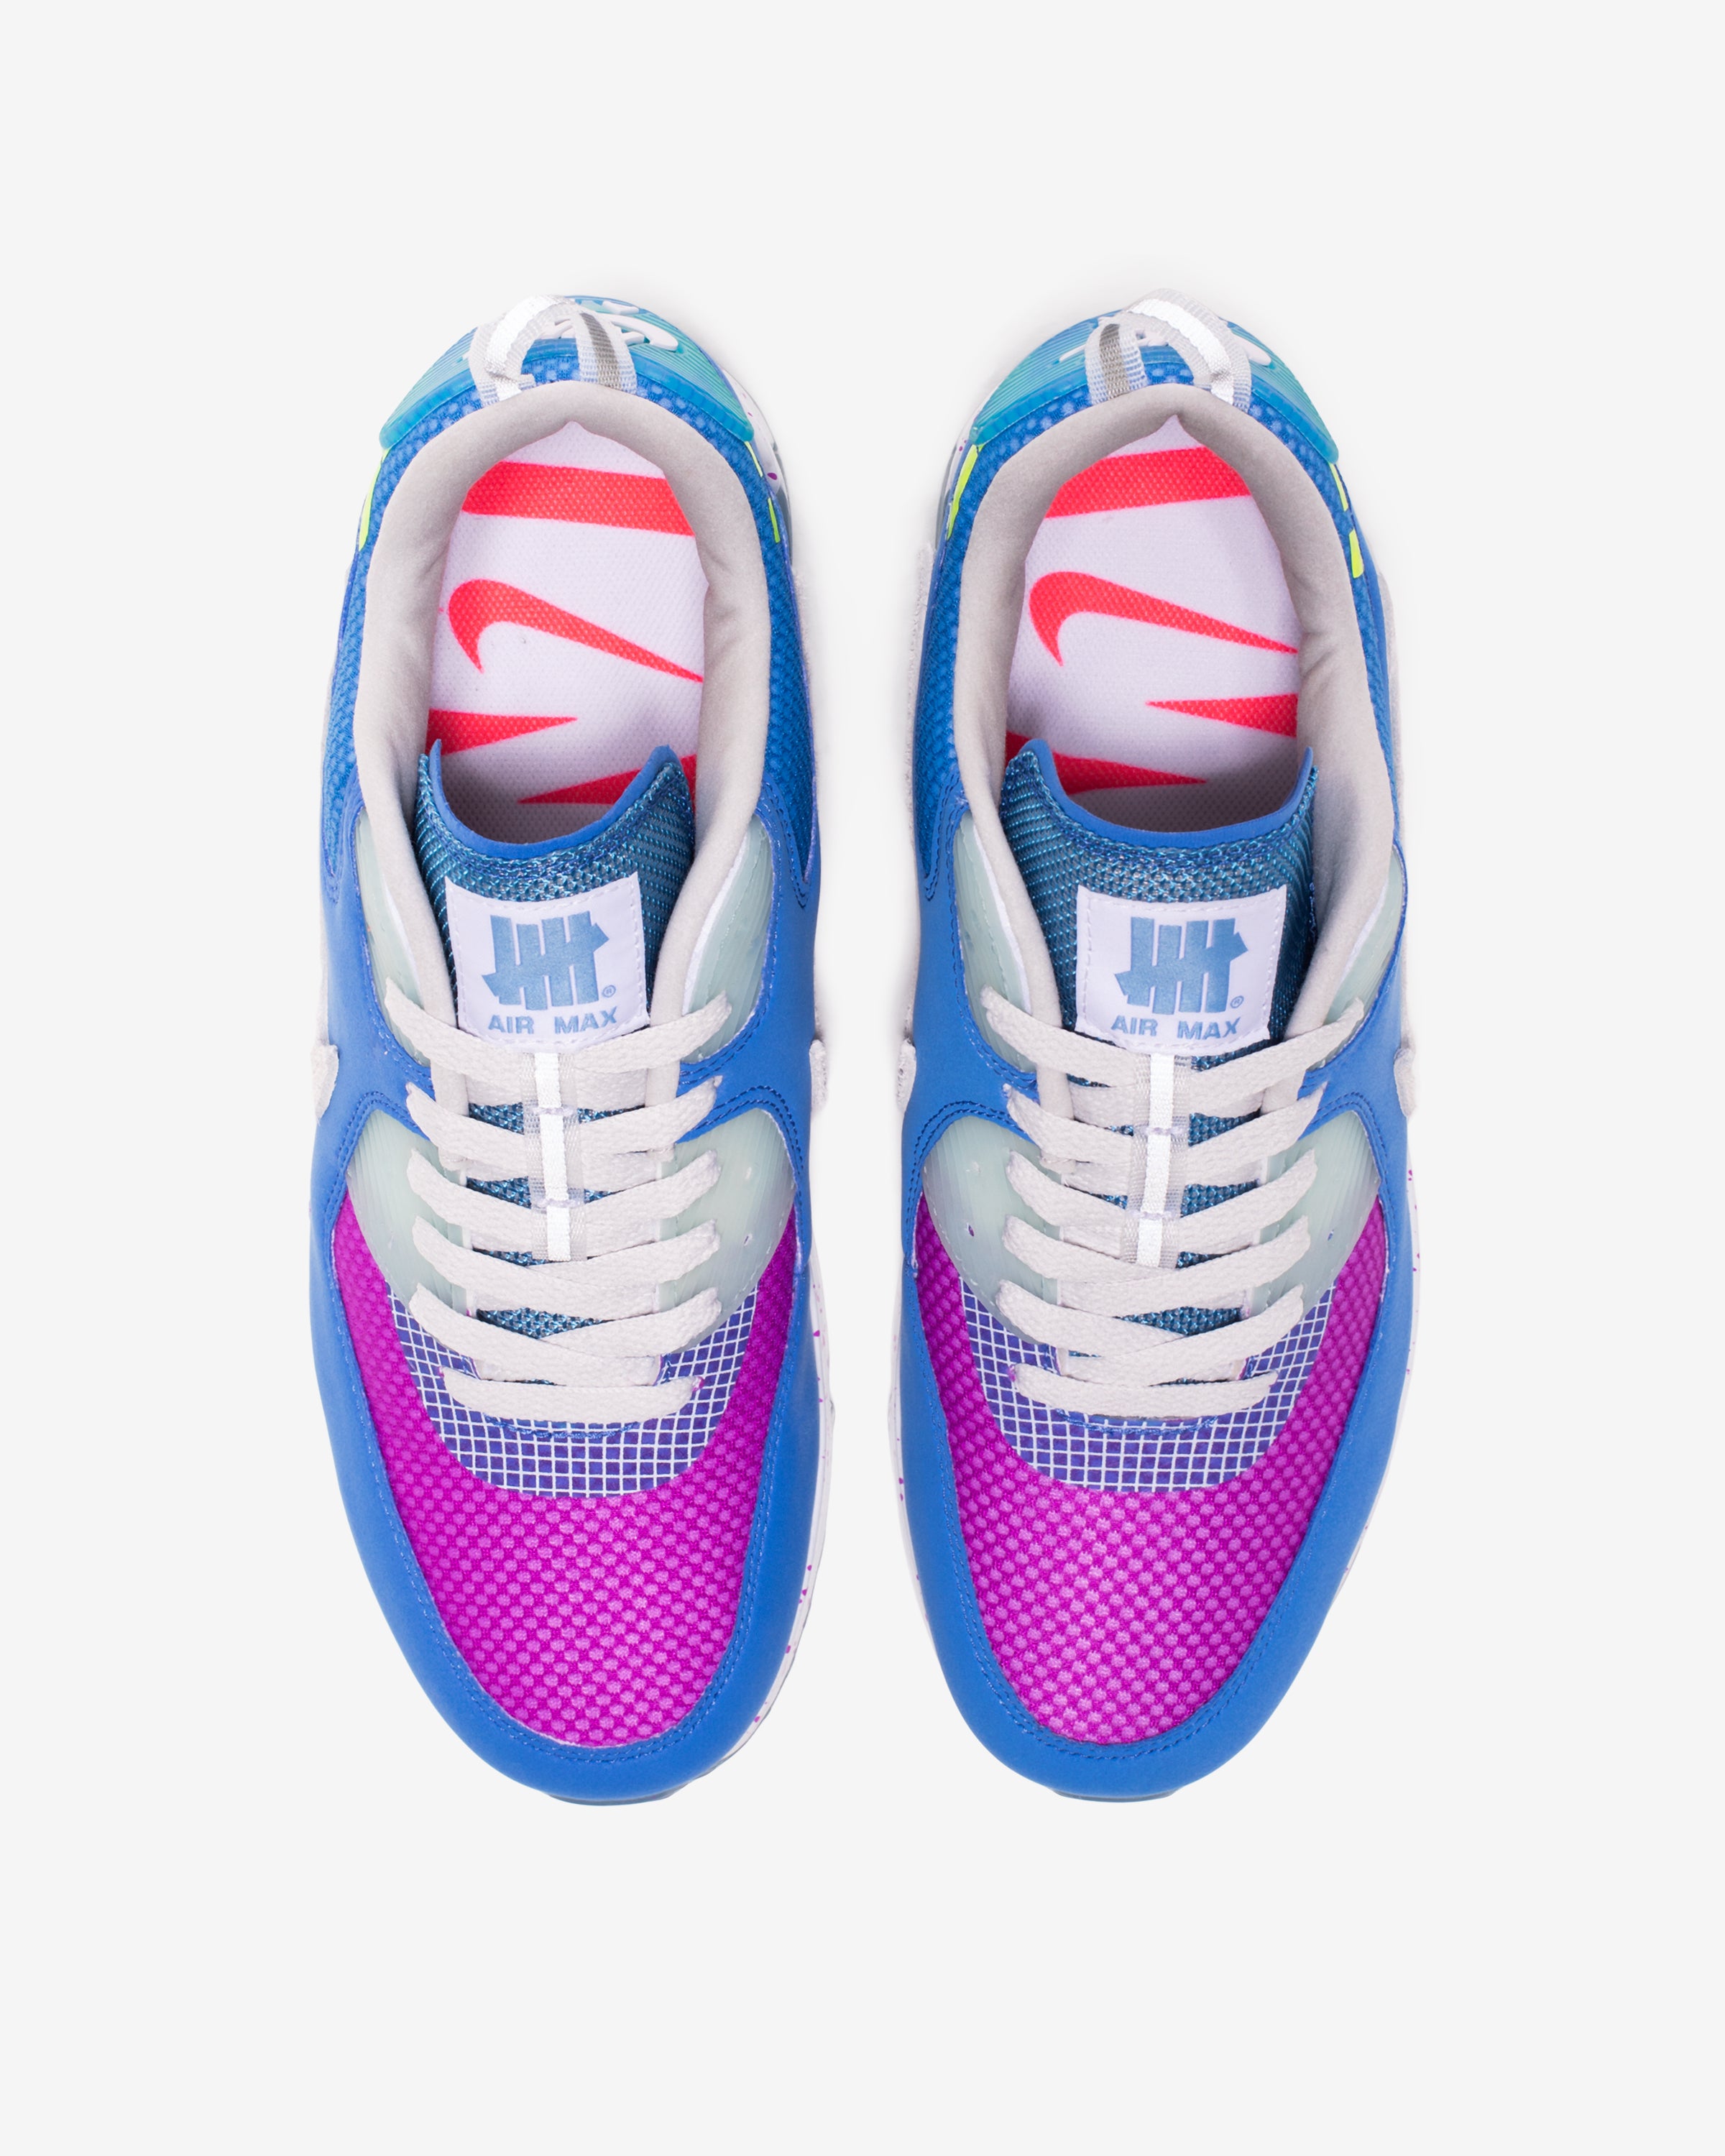 NIKE X UNDEFEATED AIR MAX 90 - PACIFICBLUE/ VIVIDPURPLE – Undefeated